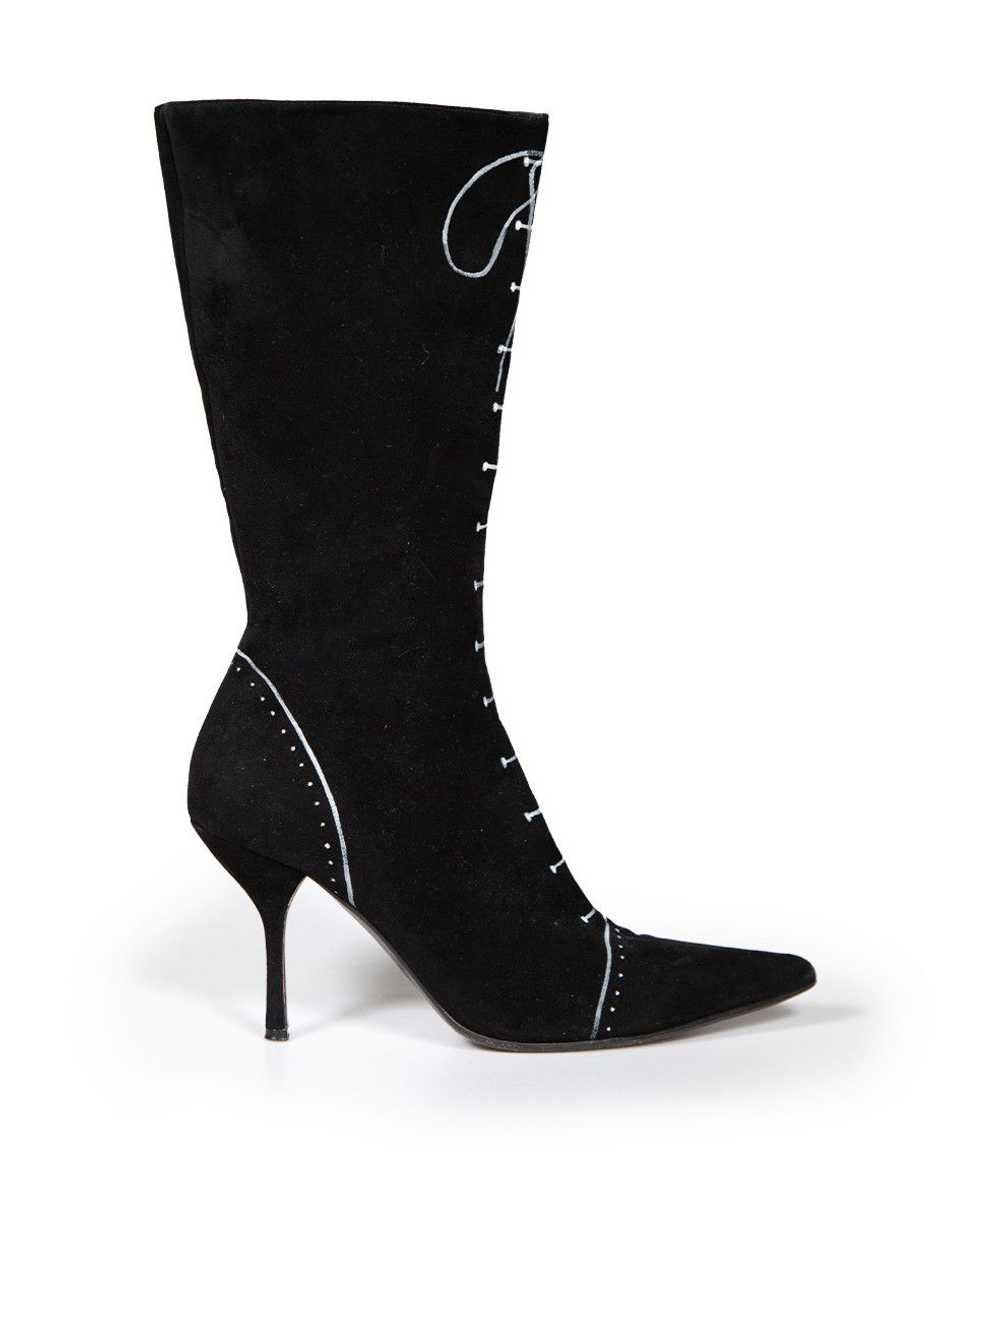 Moschino Black Suede Lace Print Boots - image 1